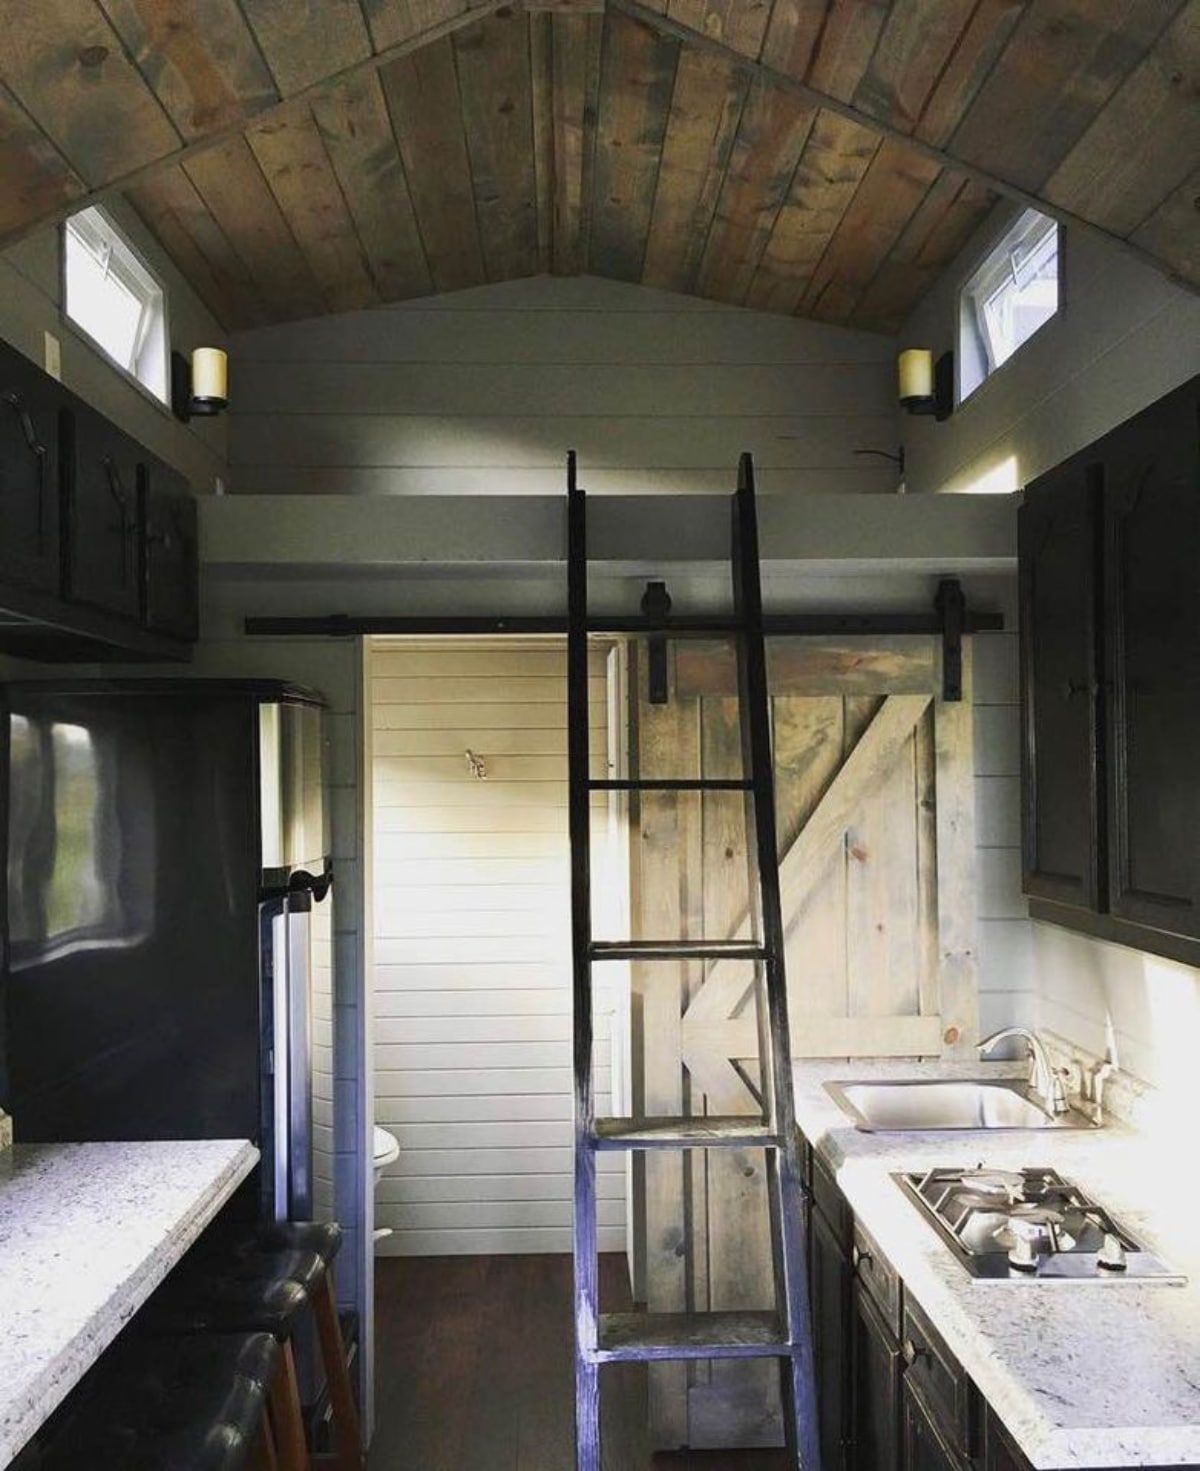 Ladder towards the loft bedroom of 180 sf Adorable Tiny House on Wheels